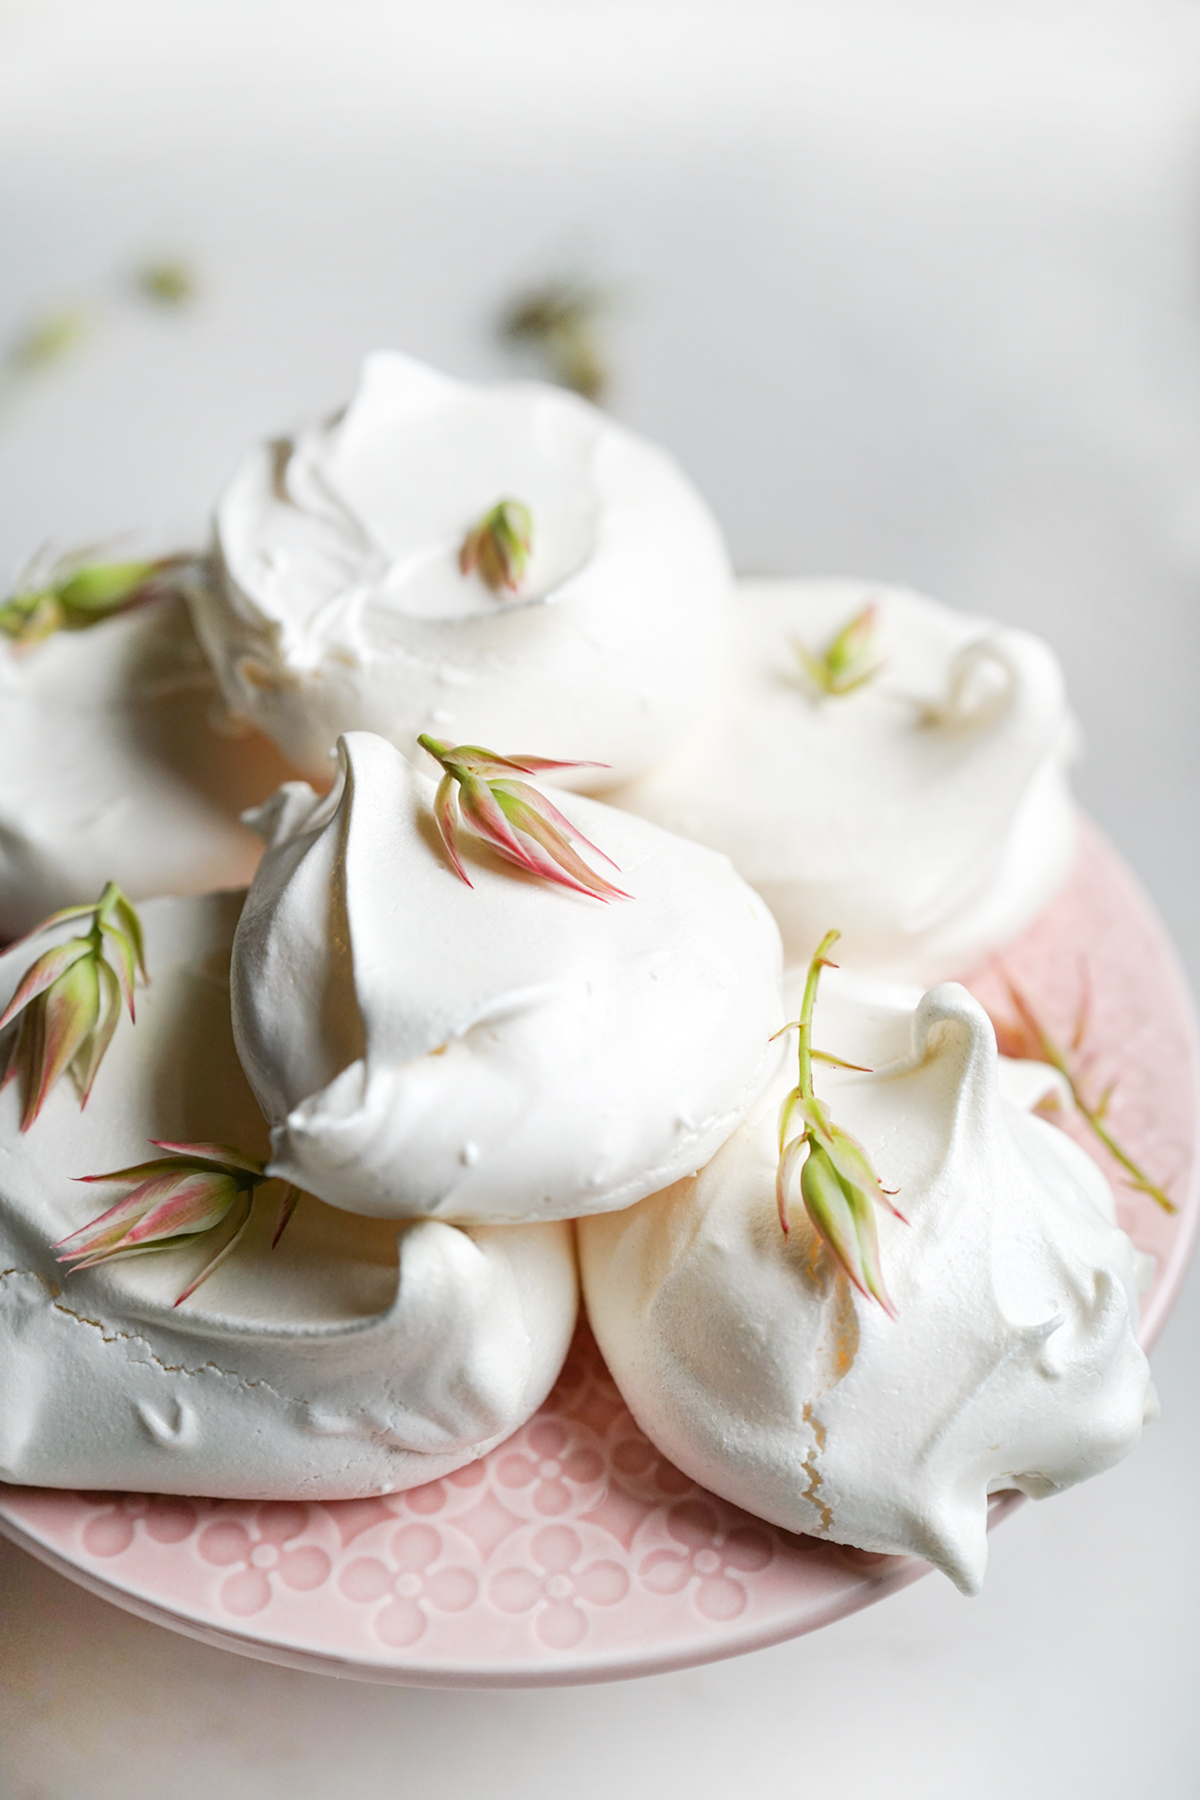 rustic meringues made with easy recipe for perfect meringues